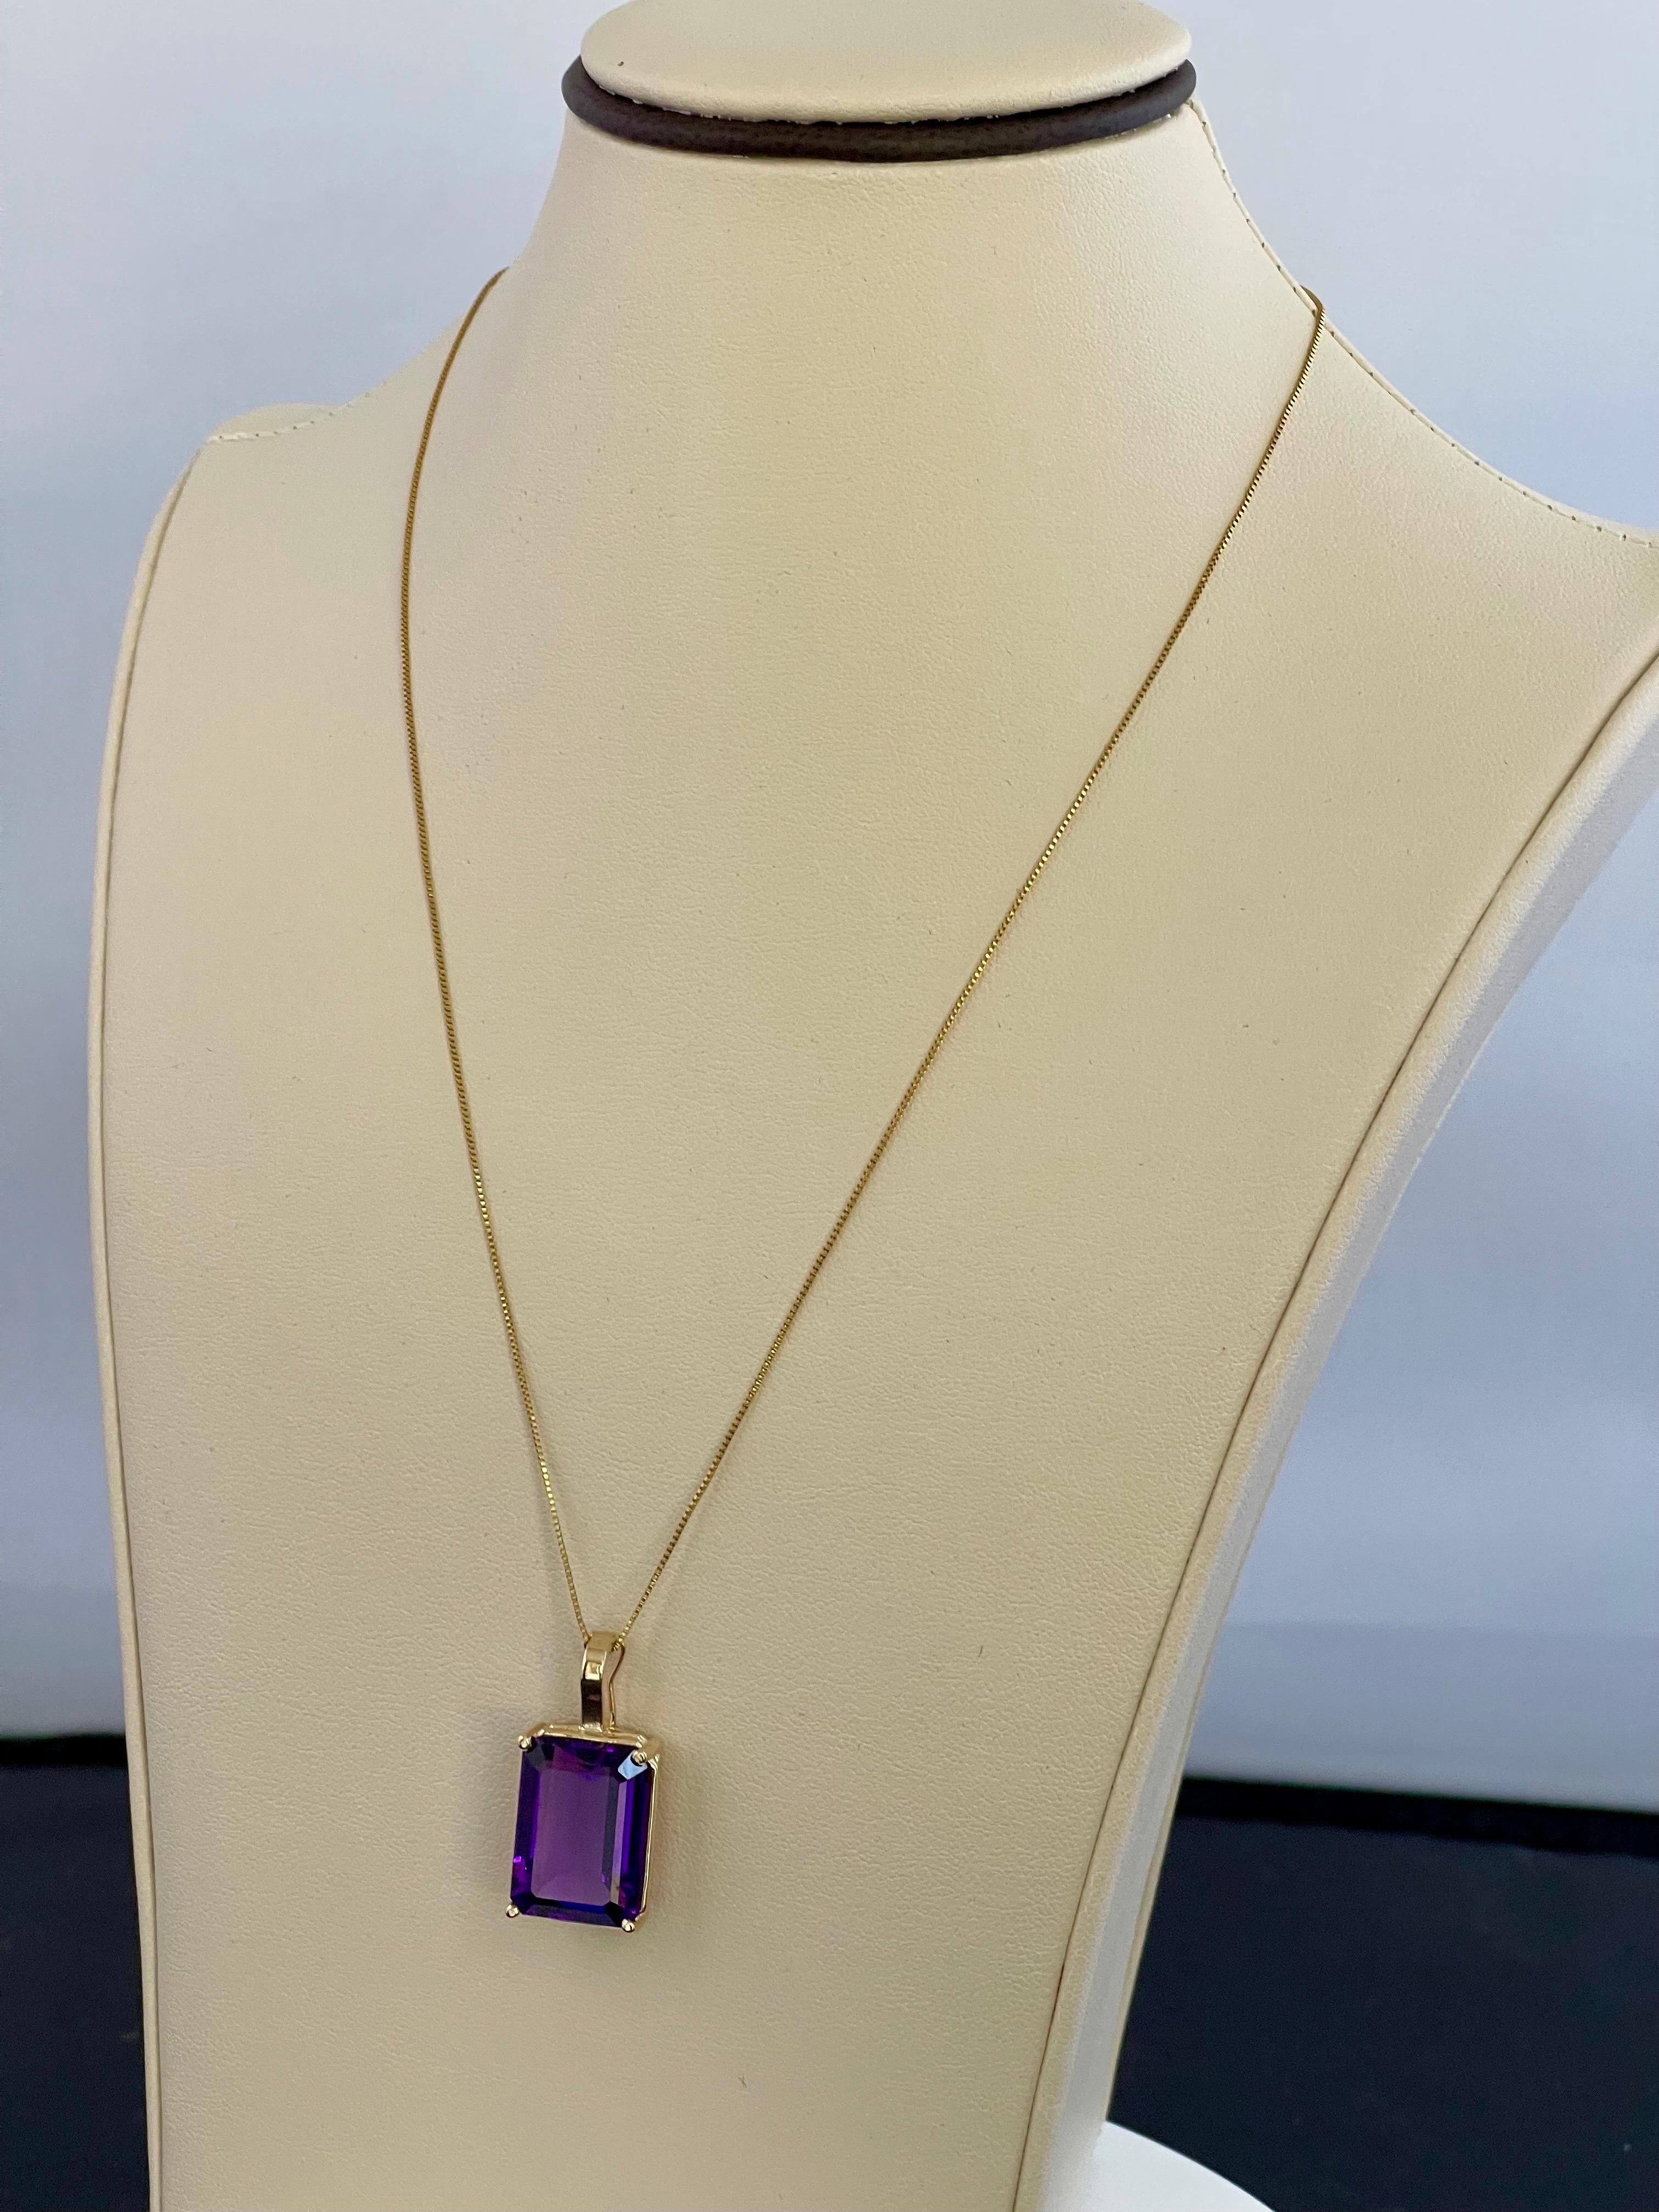  Approximately 12 Ct Emerald Cut Amethyst Pendant /Necklace + 14 Kt Yellow Gold Chain Vintage
Chain is 14 Karat  yellow gold
This spectacular Pendant Necklace  consisting of a single large Emerald  Cut Amethyst , approximately  12 Carat.  
14 Karat 